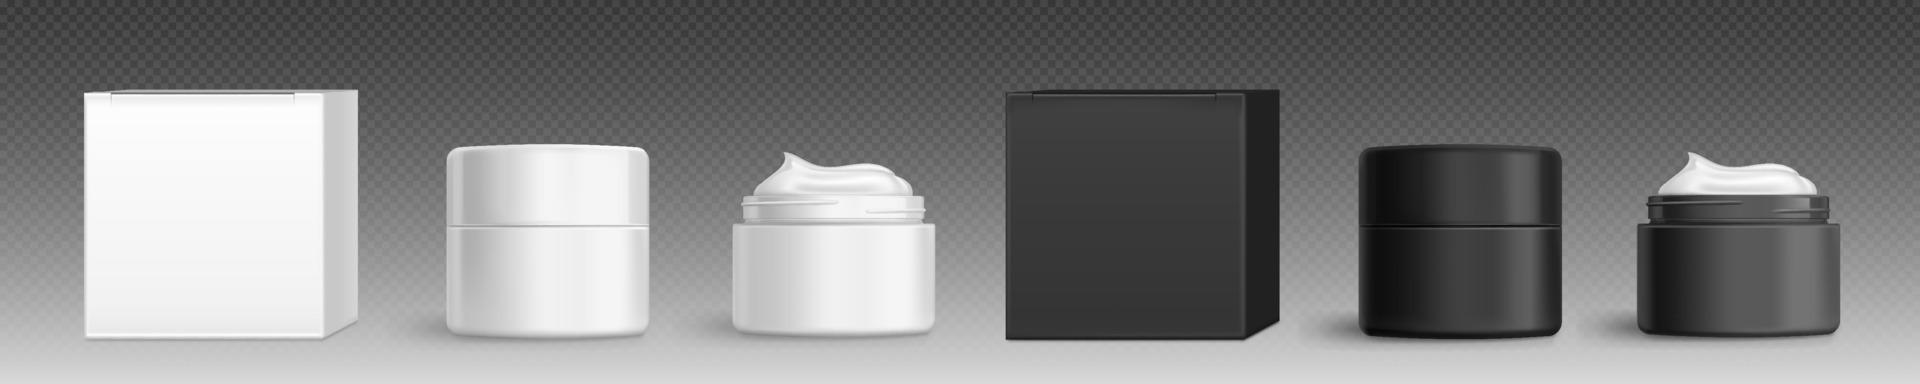 Cream jar, cosmetics package and boxes mock up set vector